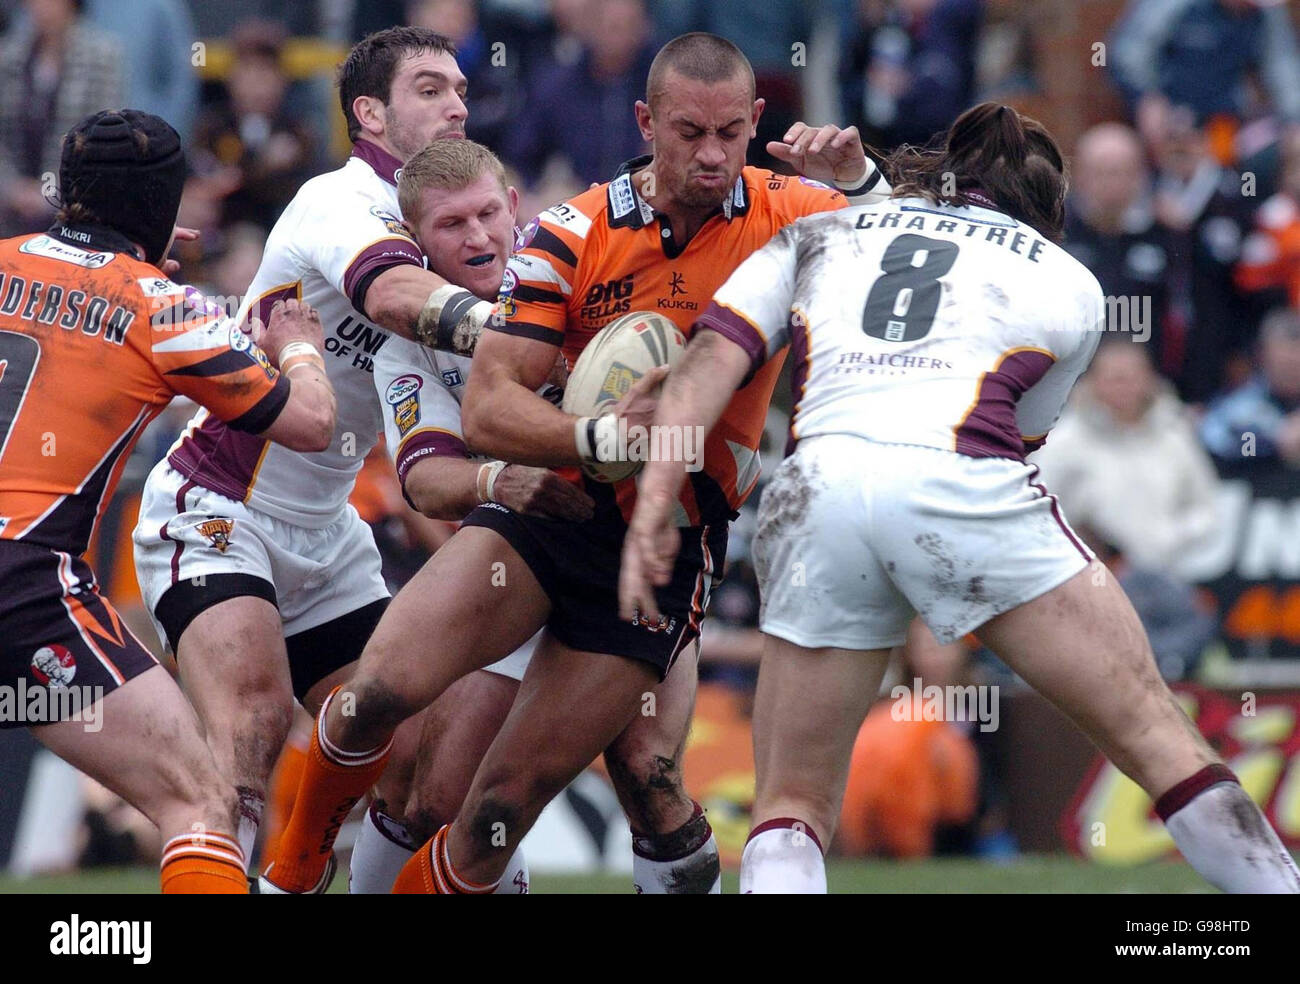 Castleford Tigers' Matt Whittaker's charge is stopped by Huddersfield Giants' Eorl Crabtree during the Engage Super League match at The Jungle, Castleford, Sunday March 26, 2006. PRESS ASSOCIATION Photo. Photo credit should read: PA. **** Stock Photo